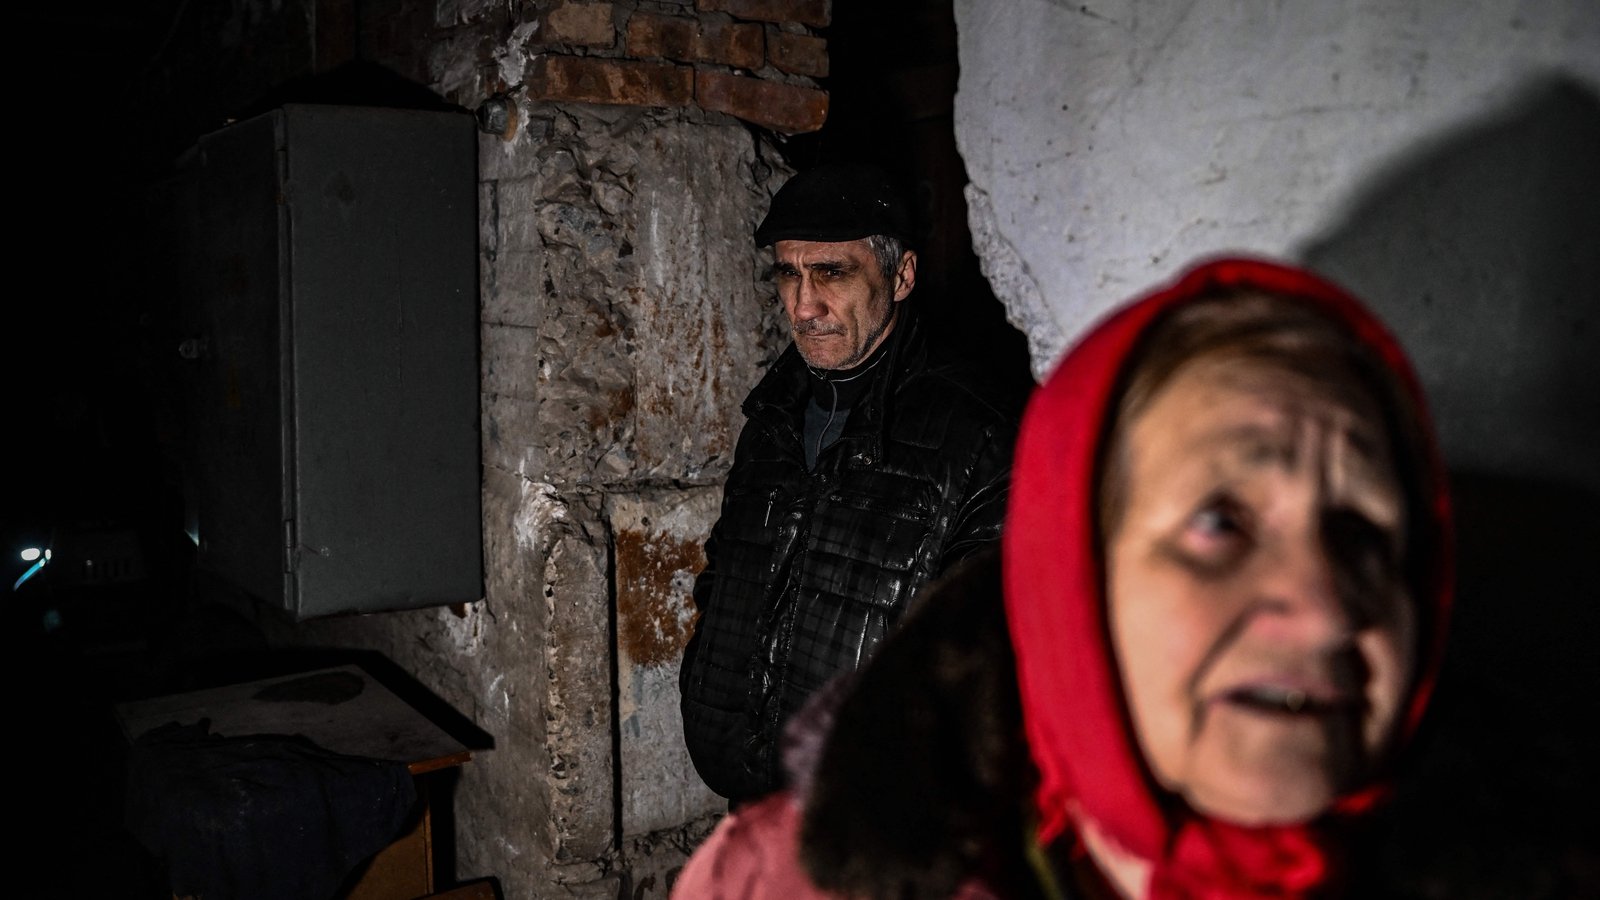 Image - After Russia recognised east Ukraine's separatist republics, people shelter in basements in Schastia, near the eastern Ukraine city of Luhansk